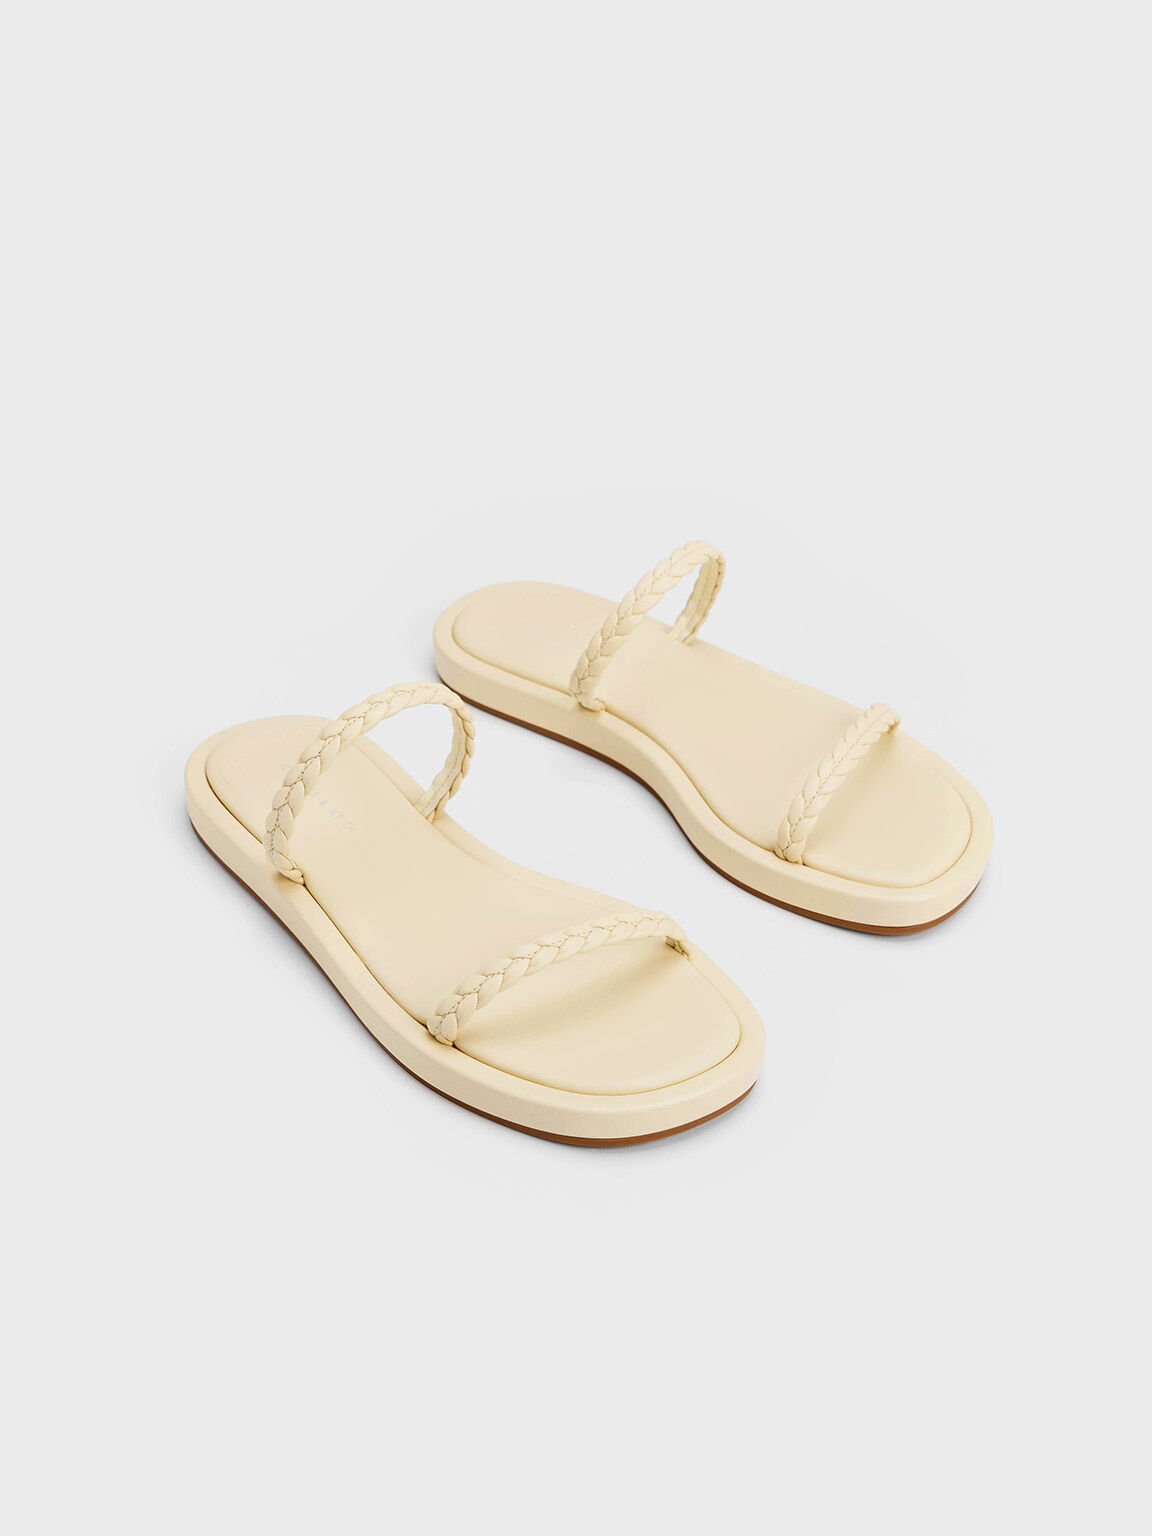 Butter Braided Slides - CHARLES & KEITH SG